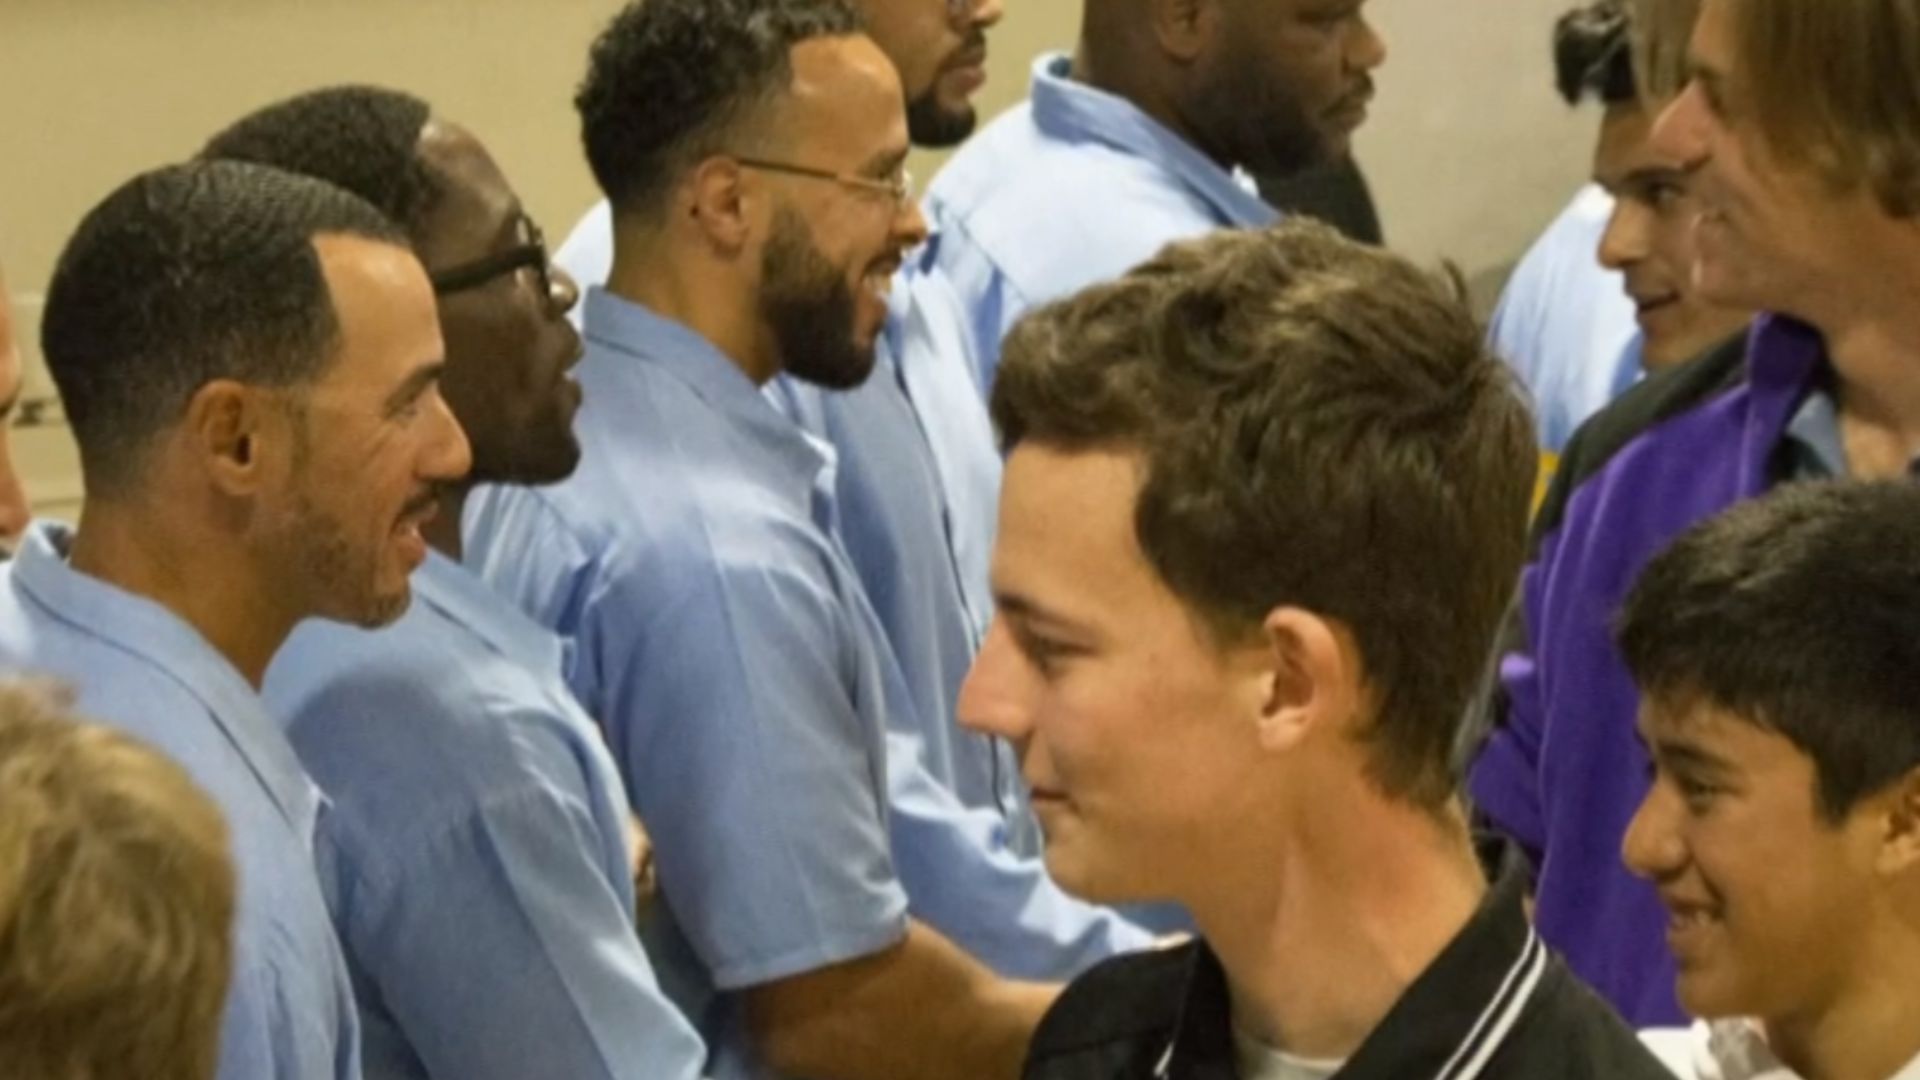 Inmates work together to raise $32,000 for student's tuition 